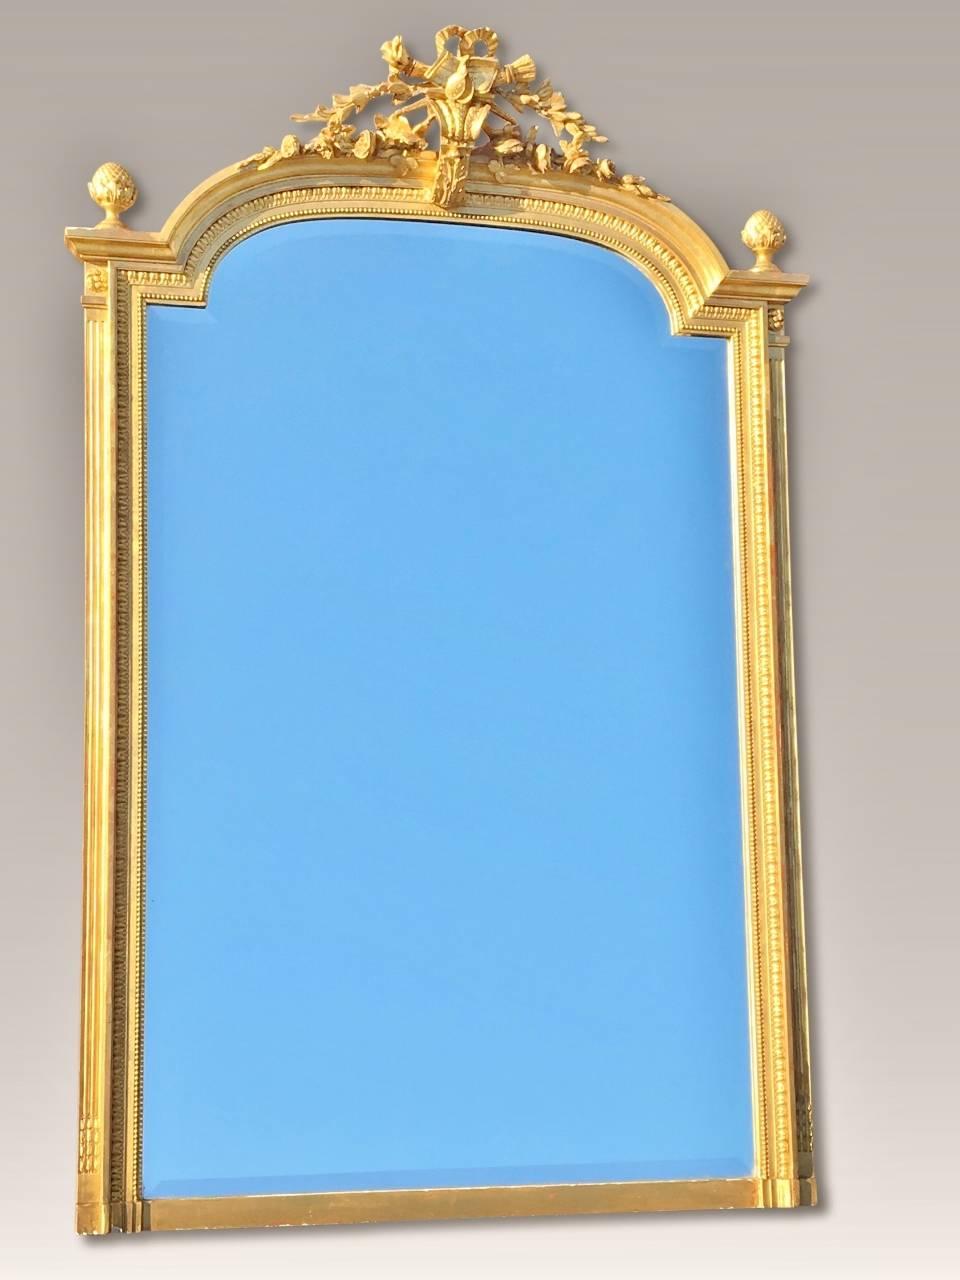 Hand-Carved 19th Century Gilded Wall Mirror / Overmantel, French, circa 1890